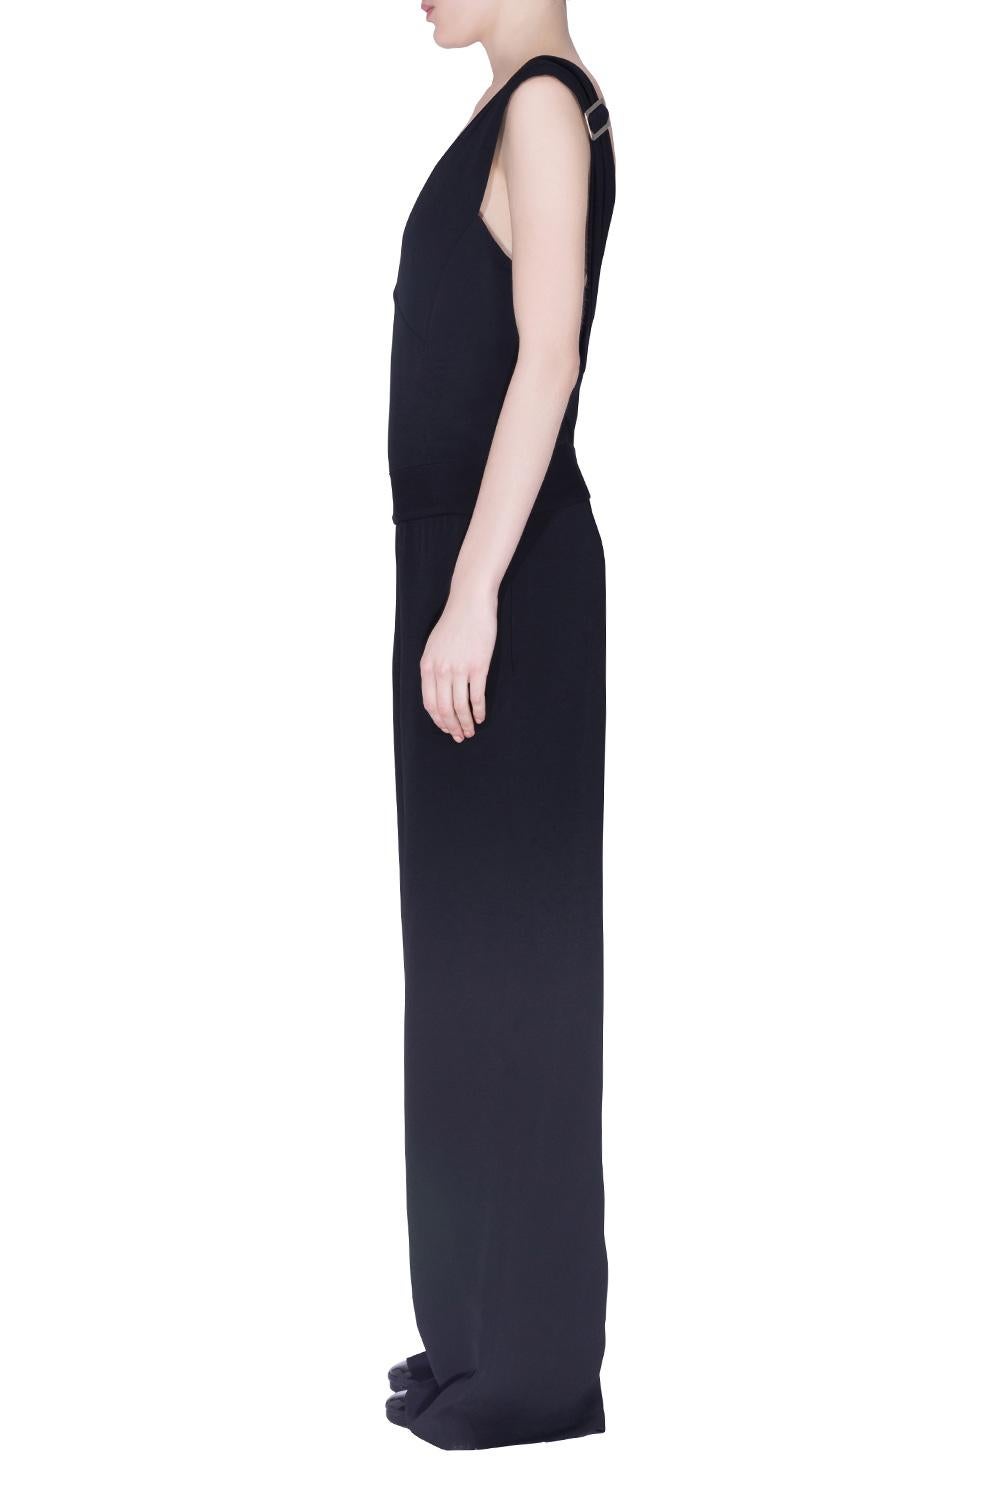 Derek Lam has made this fabulous jumpsuit from fine black fabric. The piece features a plunging neckline with buckle detail on the shoulders. The sleeveless jumpsuit will be your perfect choice for evening outings, all you need is just the right